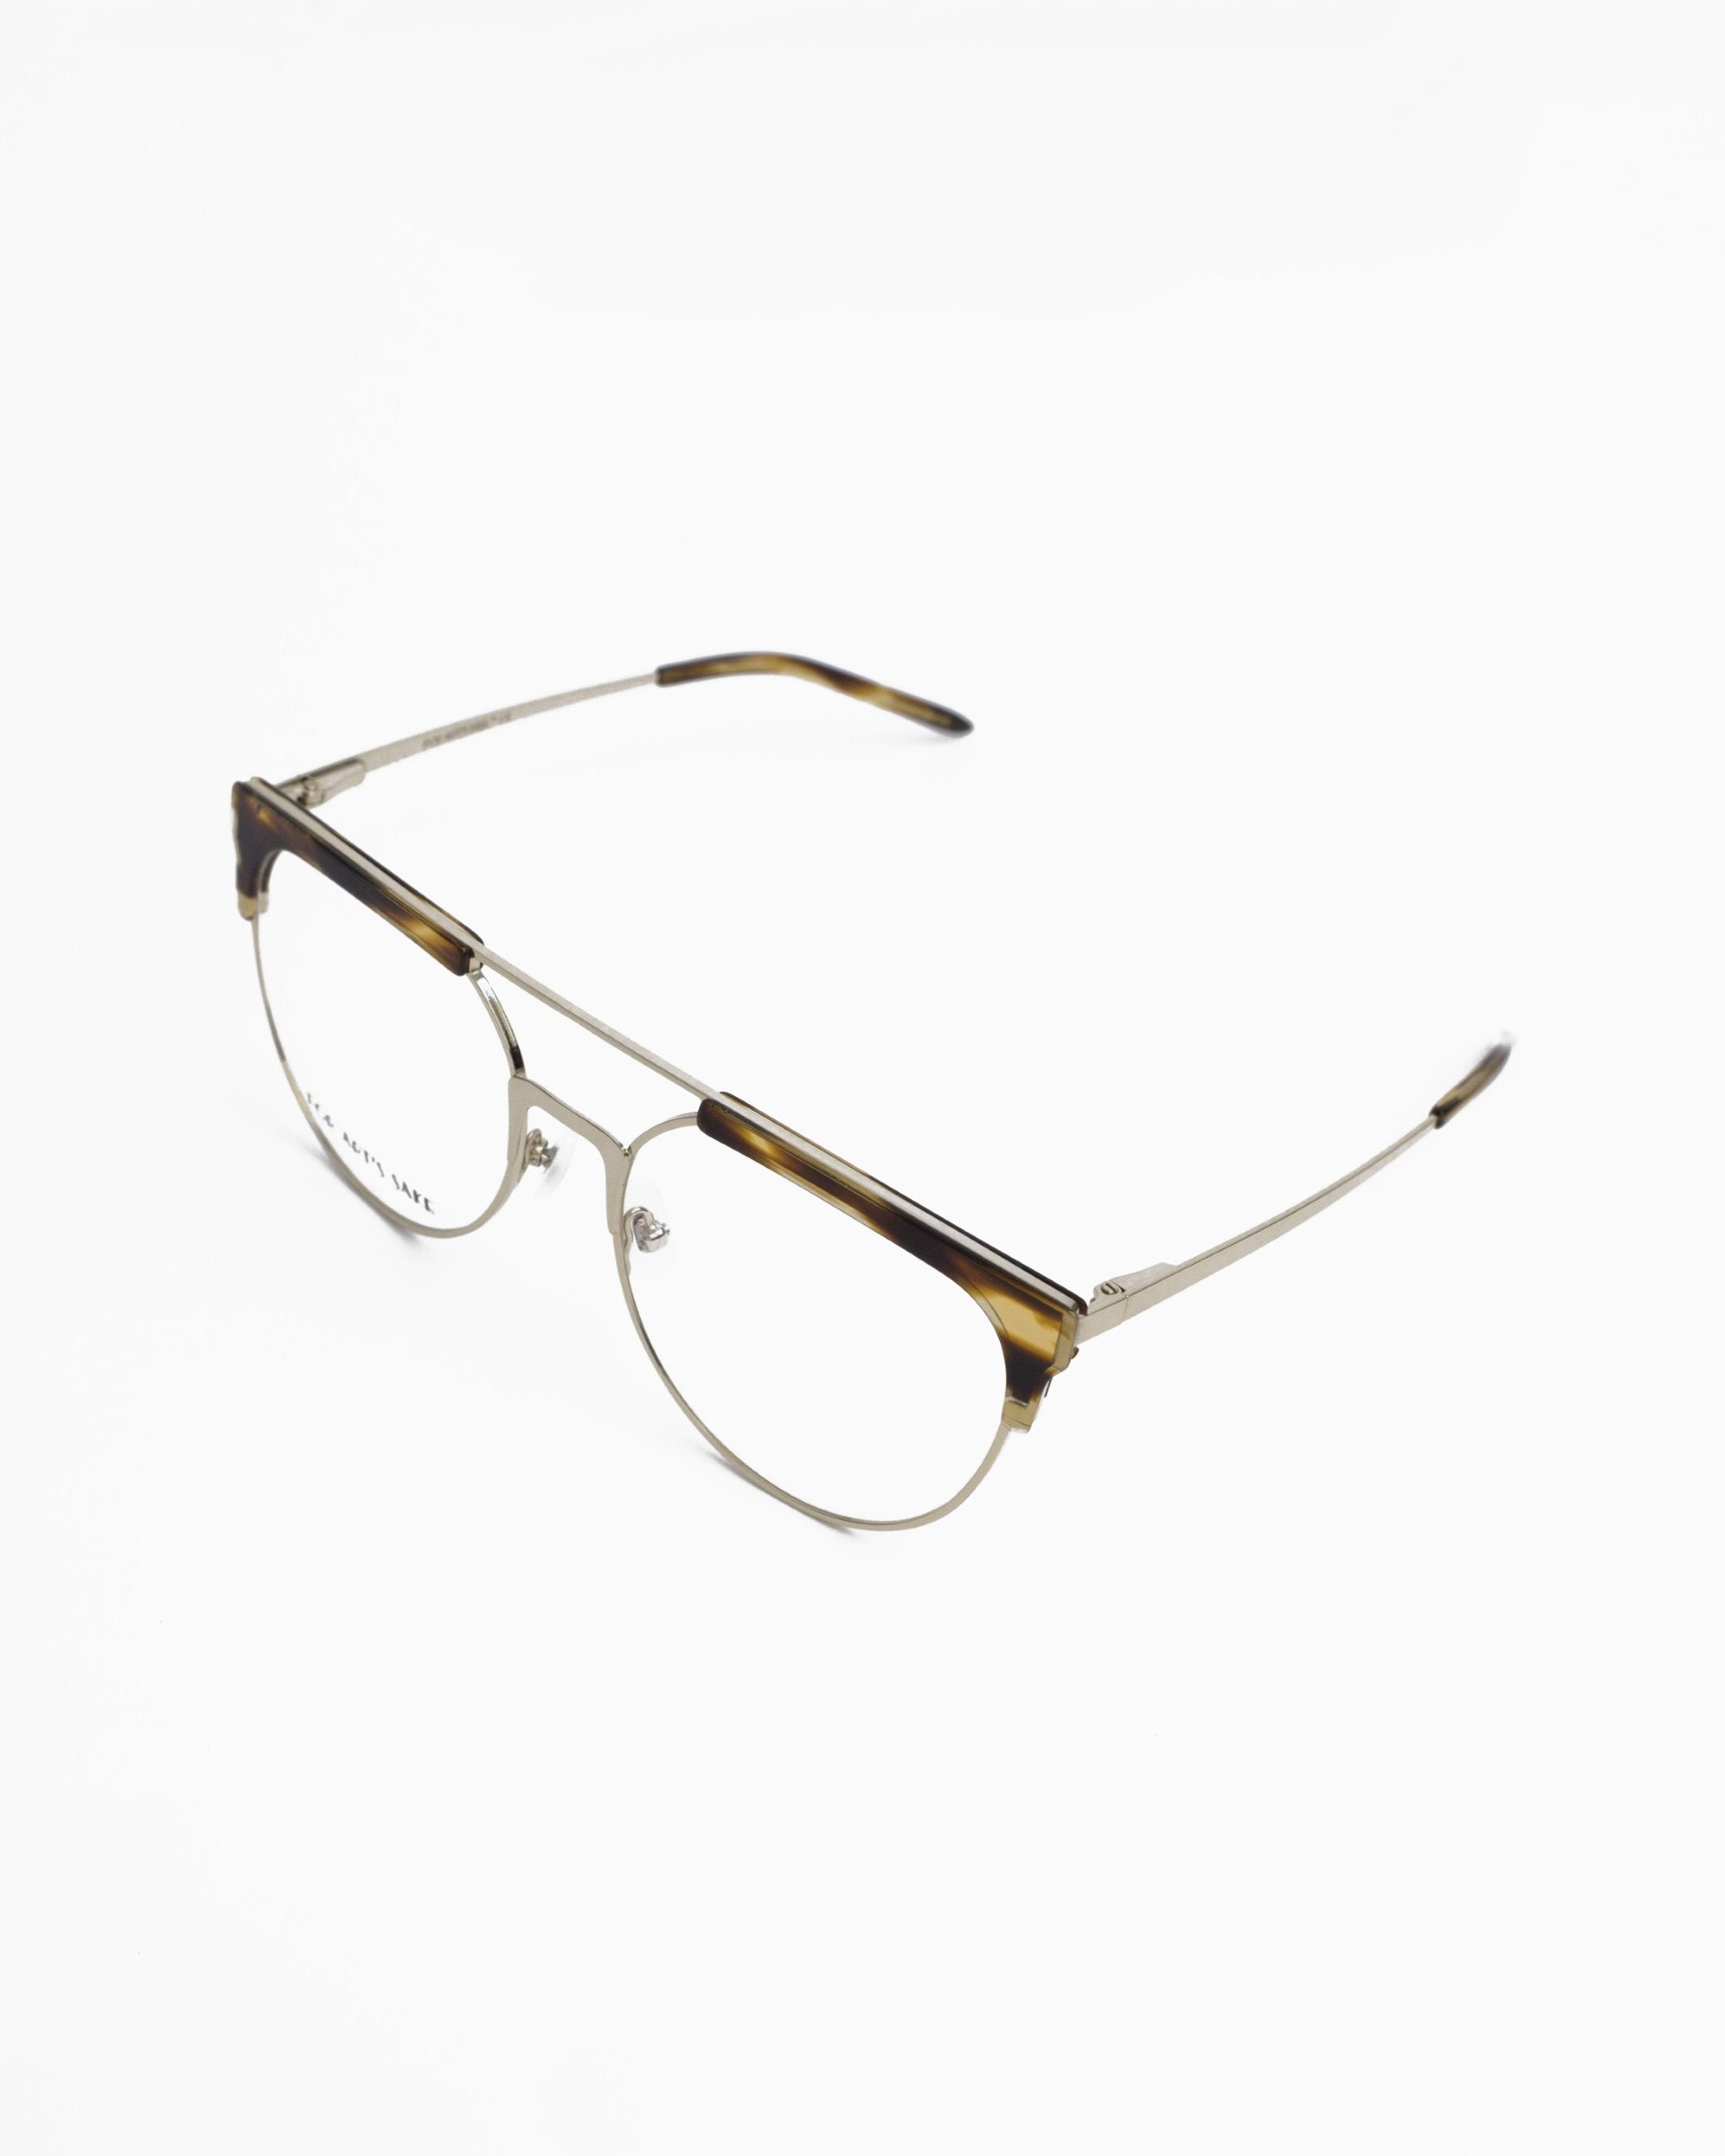 A pair of Frosty by For Art&#39;s Sake® prescription glasses with clear round lenses, thin gold metal frames, and tortoiseshell detailing on the top rims. The temples are thin and gold, with tortoiseshell accents at the tips. These stylish glasses, also equipped with blue light filter technology, are set against a white background.